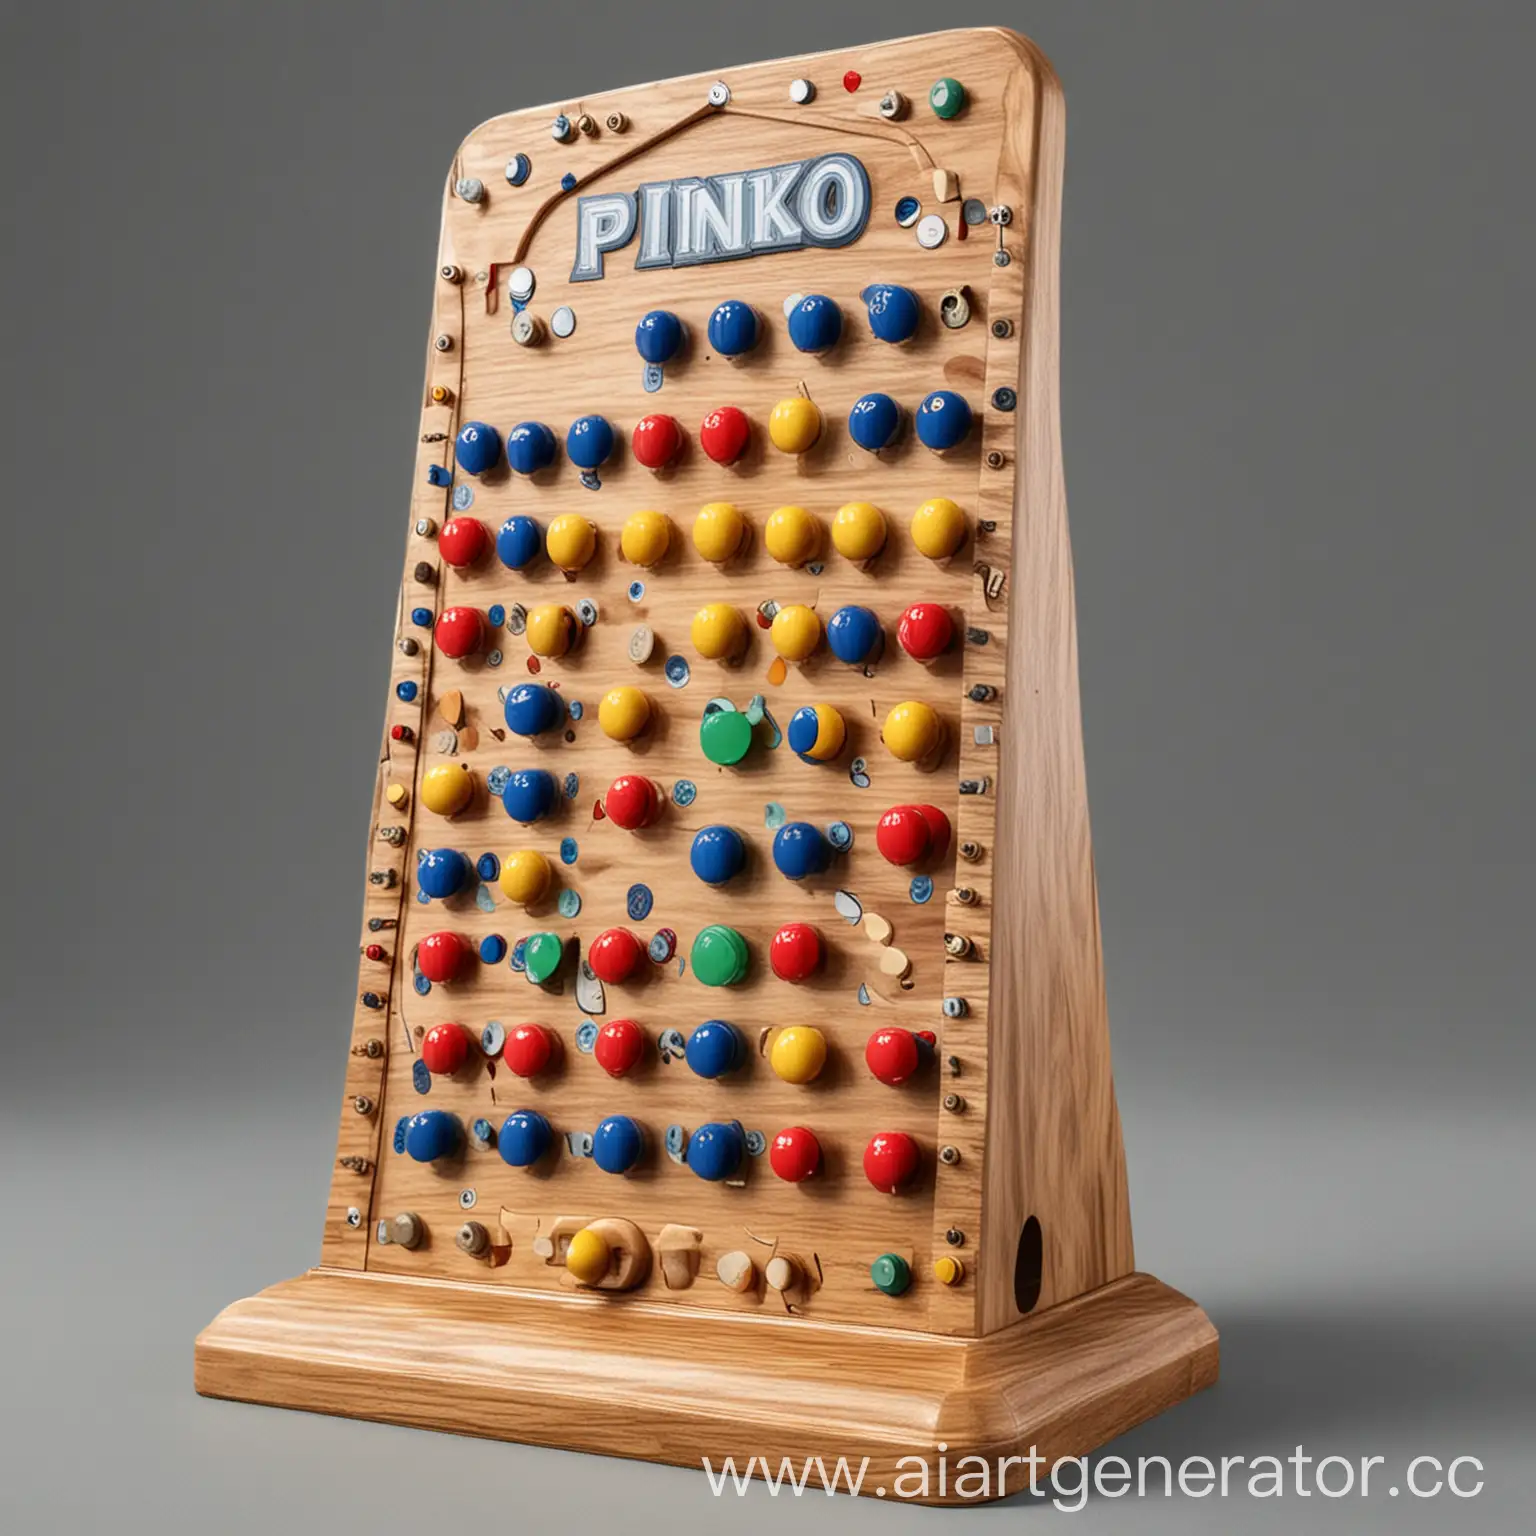 Interactive-Plinko-Game-with-Colorful-Pegs-and-Prizes